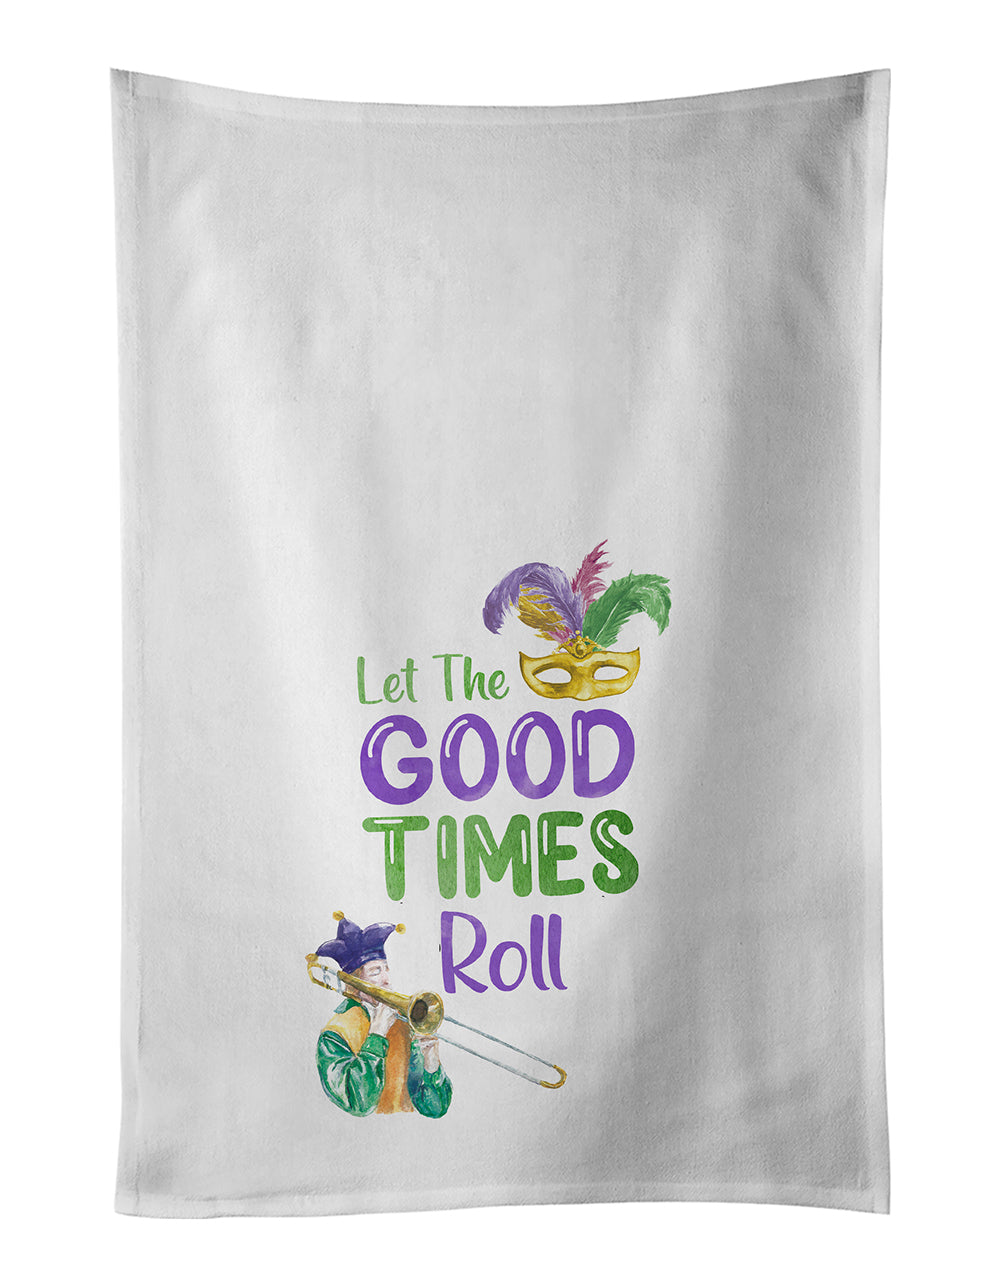 Buy this Let the Good Times Roll Mardi Gras White Kitchen Towel Set of 2 Dish Towels